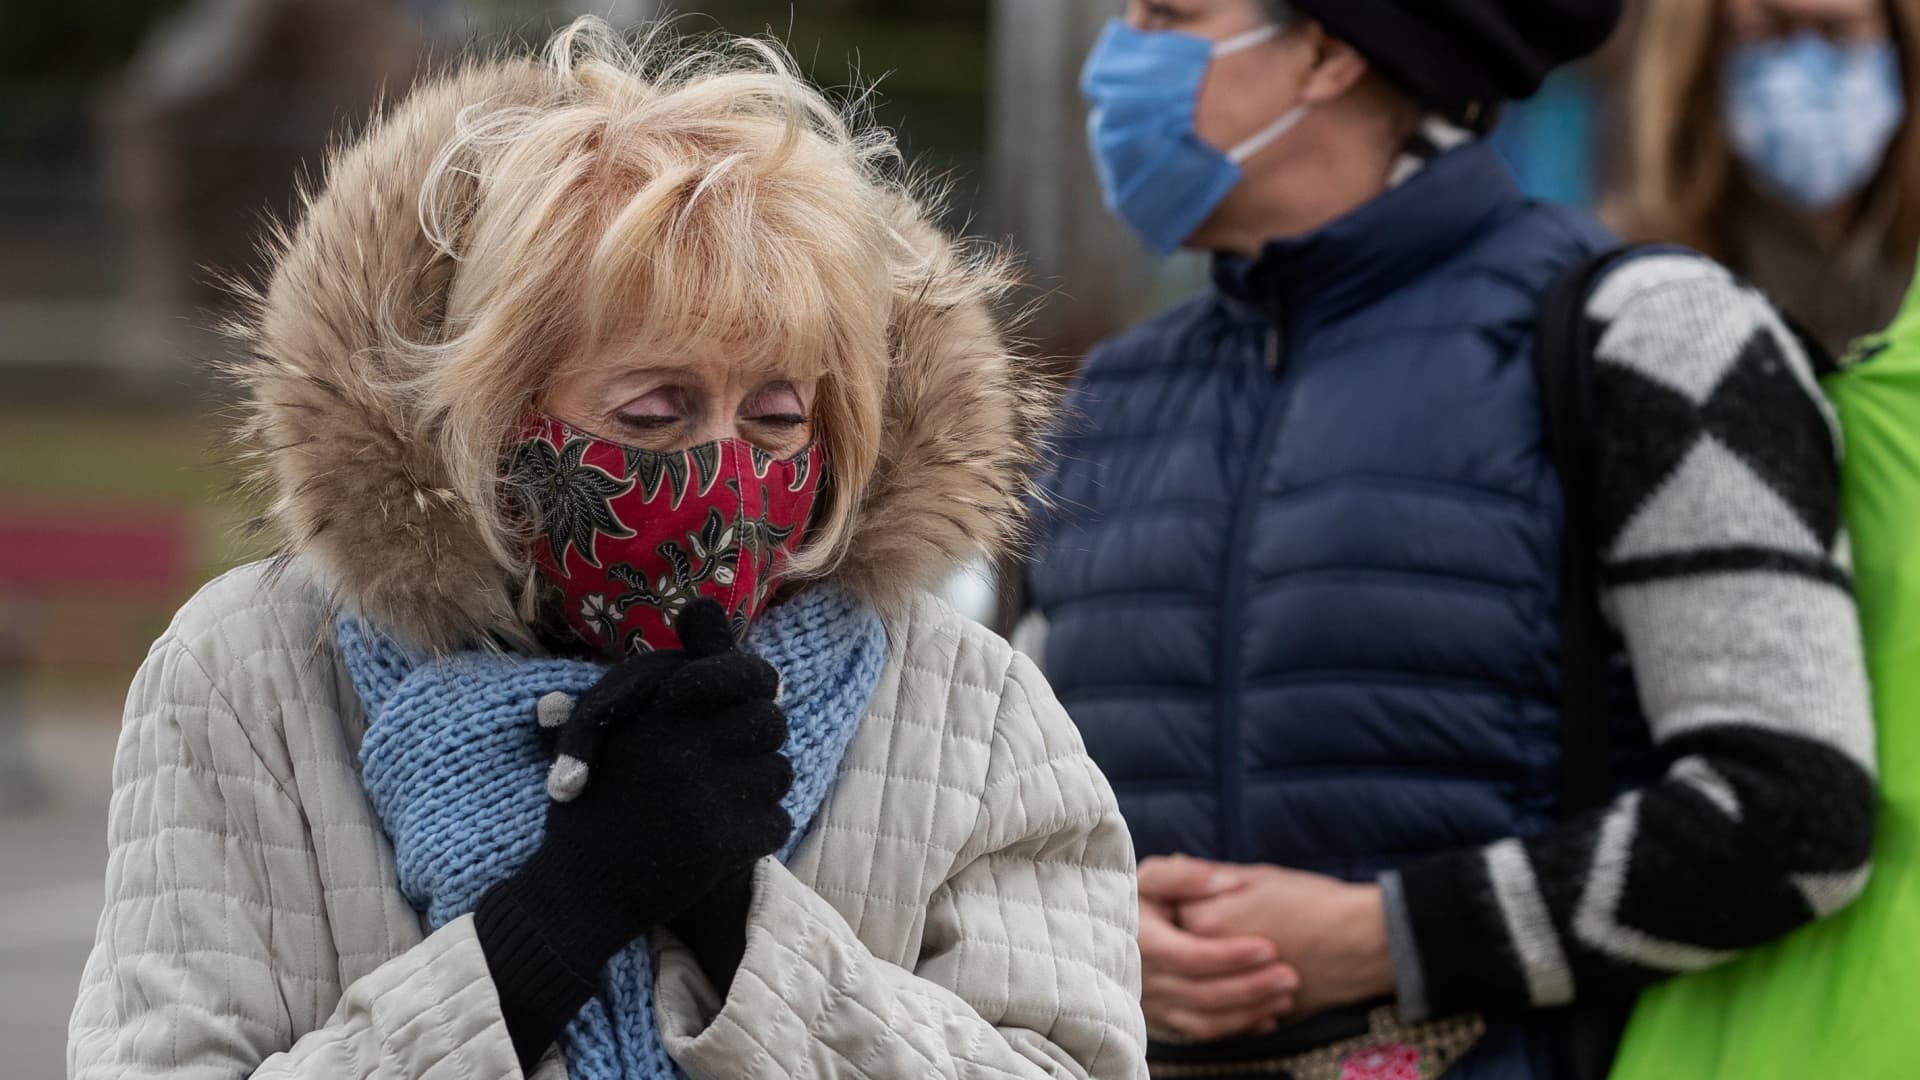 Evelyn Mellman, 82, of Studio City, tries to keep warm while waiting with others in the by appointment only line to get vaccine shots to protect against the coronavirus at the Balboa Sports Complex in Encino.